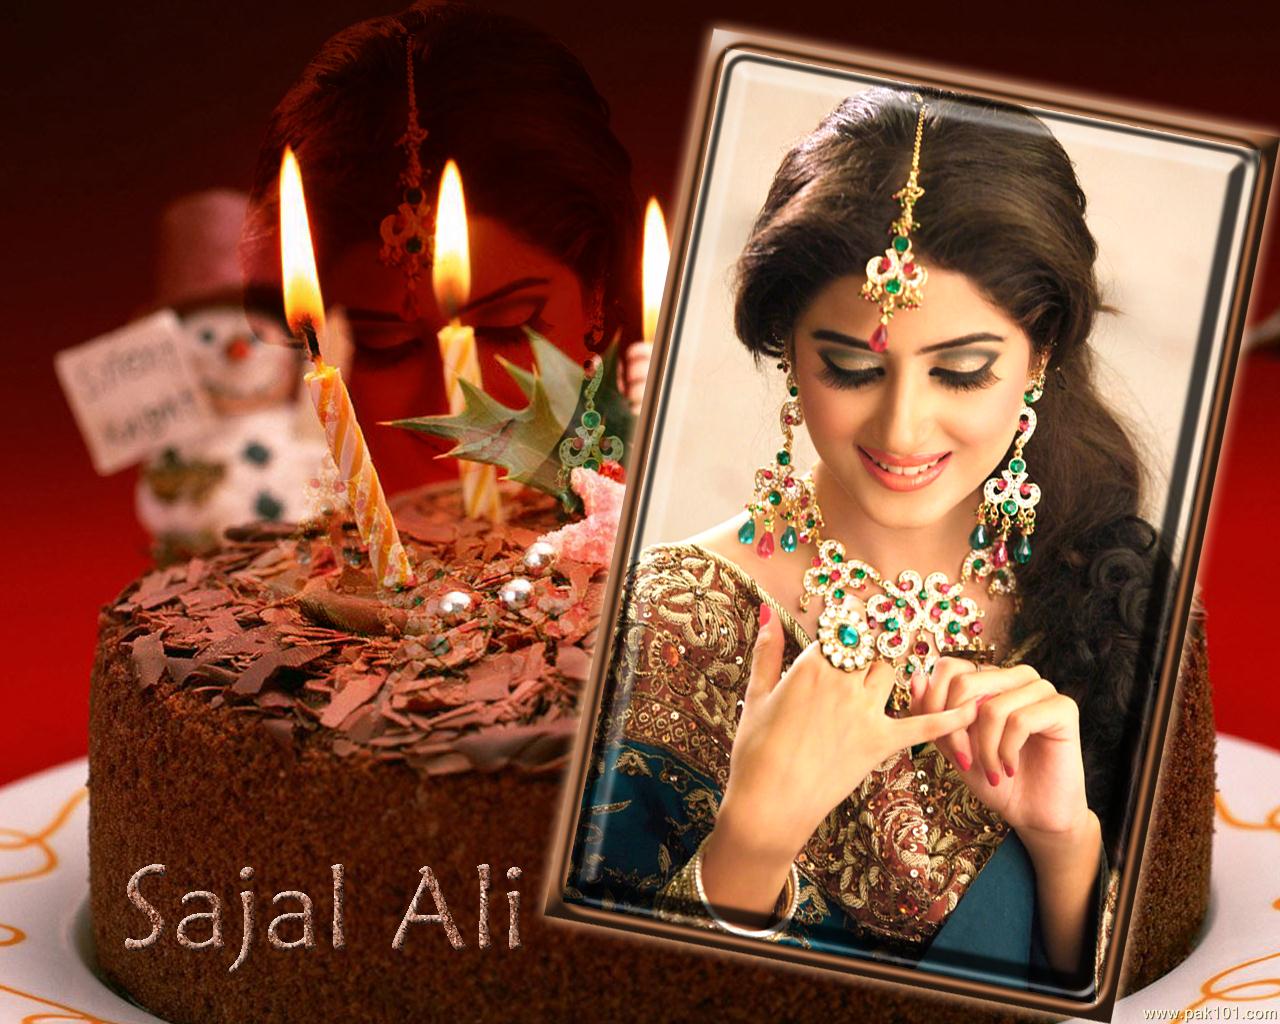 Sajal Ali - Wish You Many Many Happy Returns , HD Wallpaper & Backgrounds